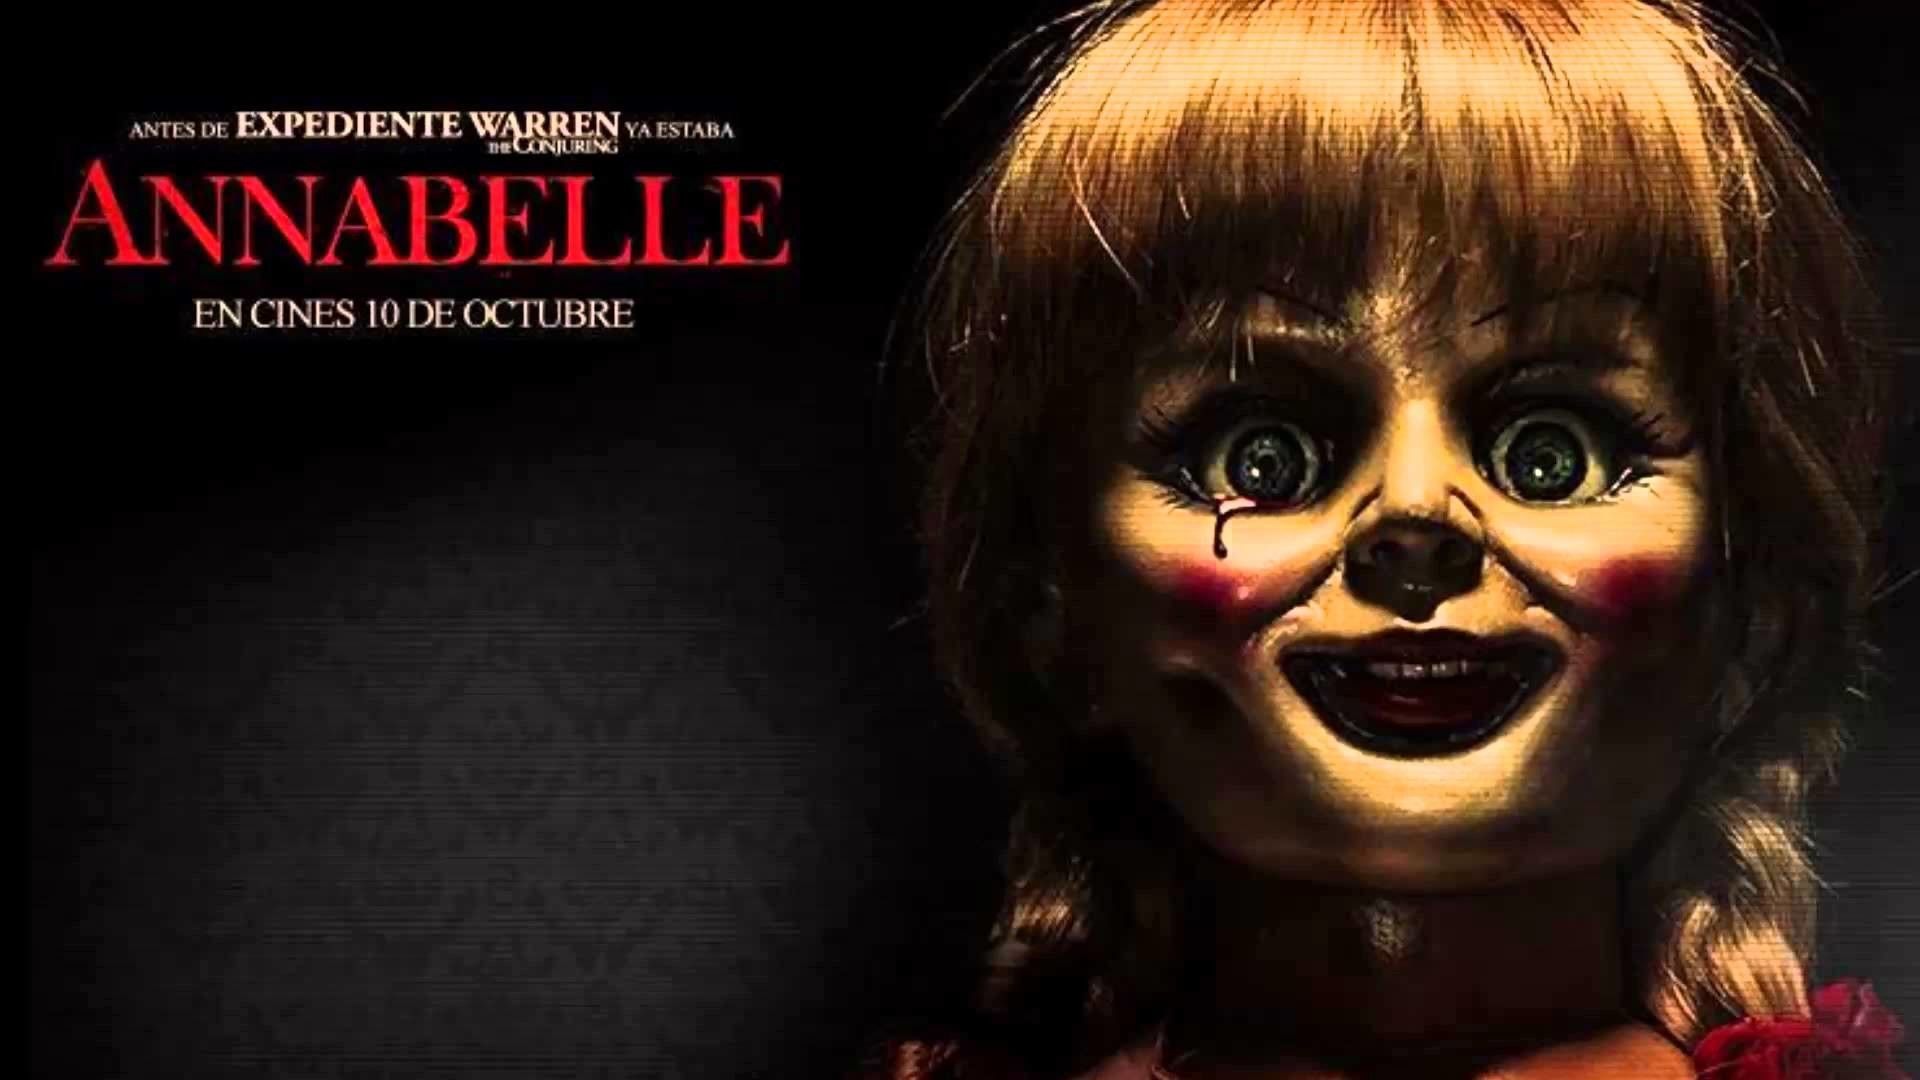 Annabelle: Creation Wallpaper For iPhone. iPhone wallpaper, Wallpaper, Movie wallpaper